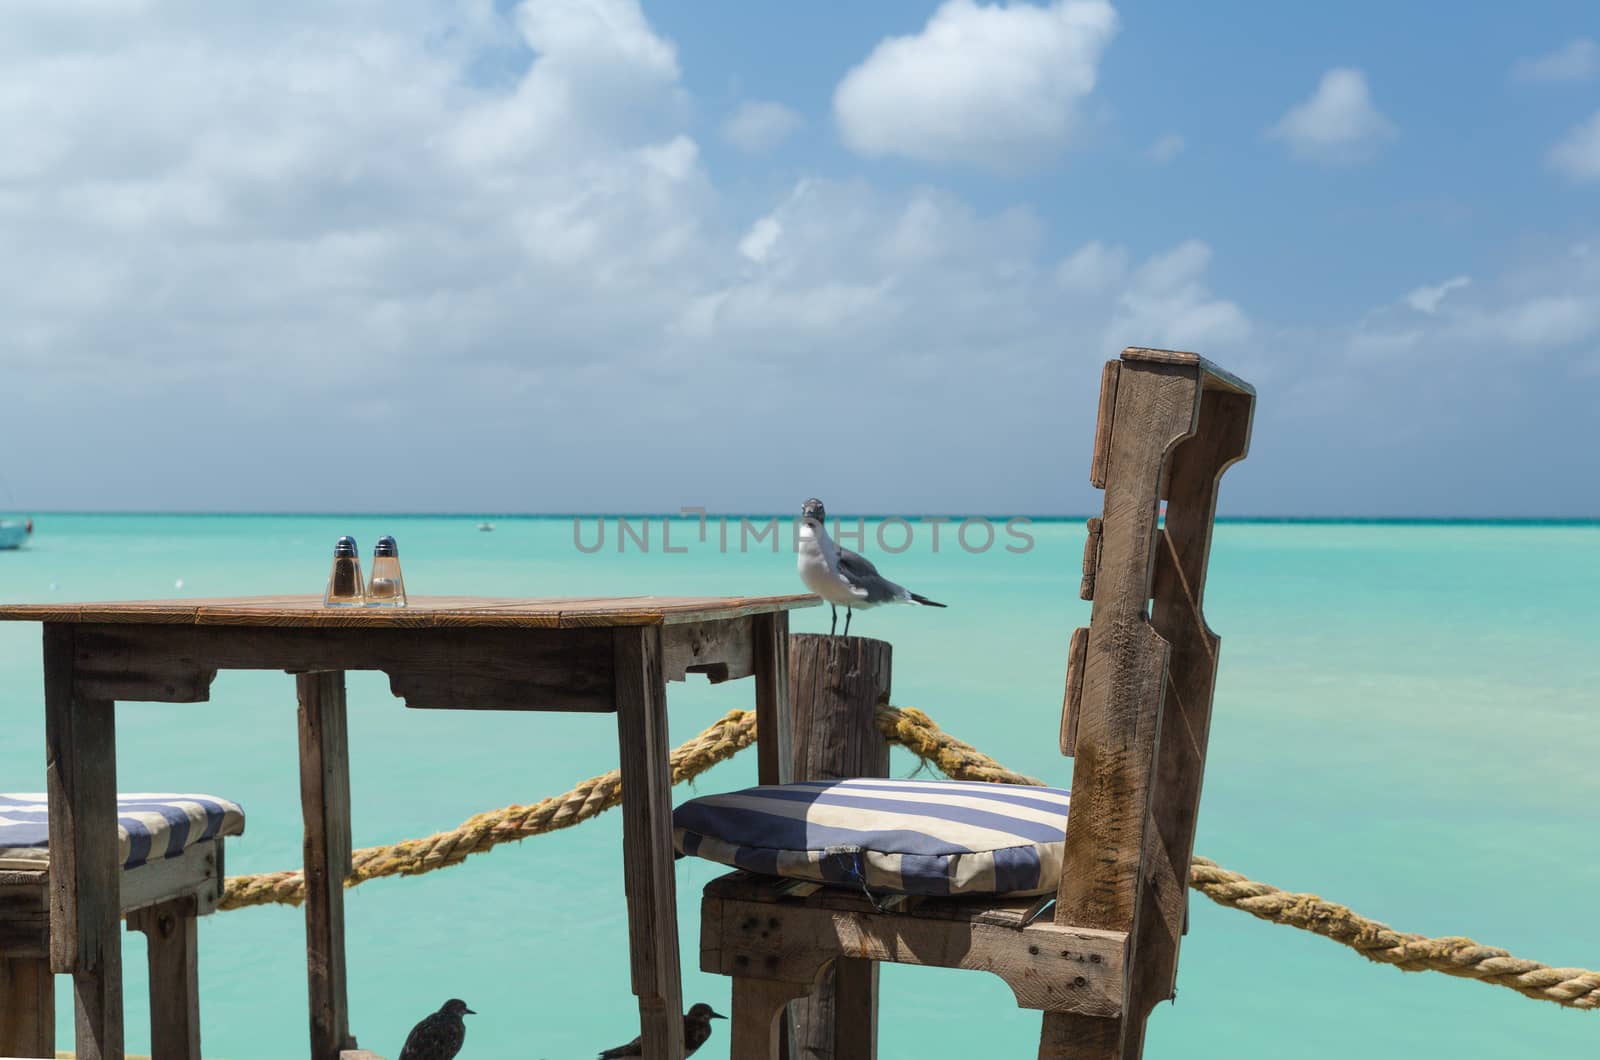 On Pelican Pier, an amazing lookout to the sea and view for a meal in Aruba in the Dutch Antilles.  The birds are ready for a meal